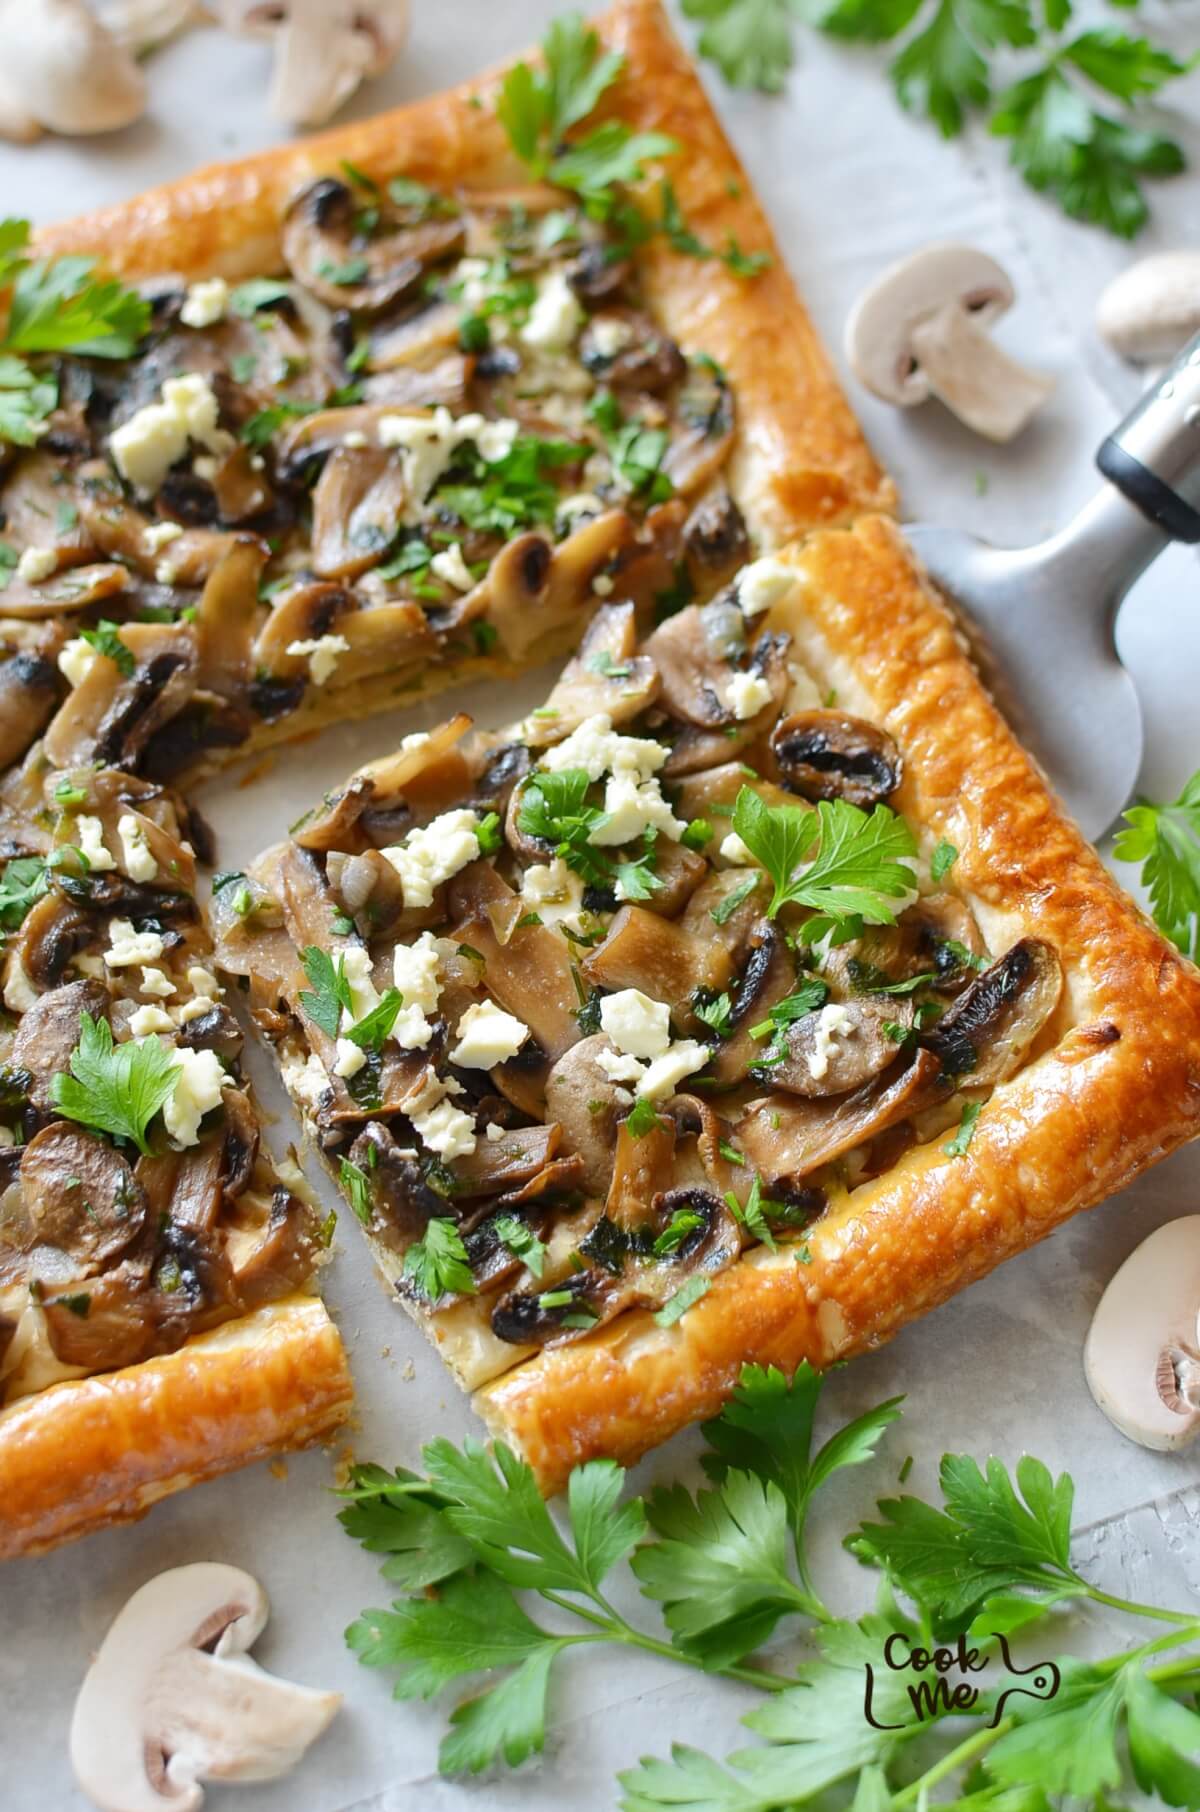 Mushroom Tart with Puff Pastry Recipe - Cook.me Recipes